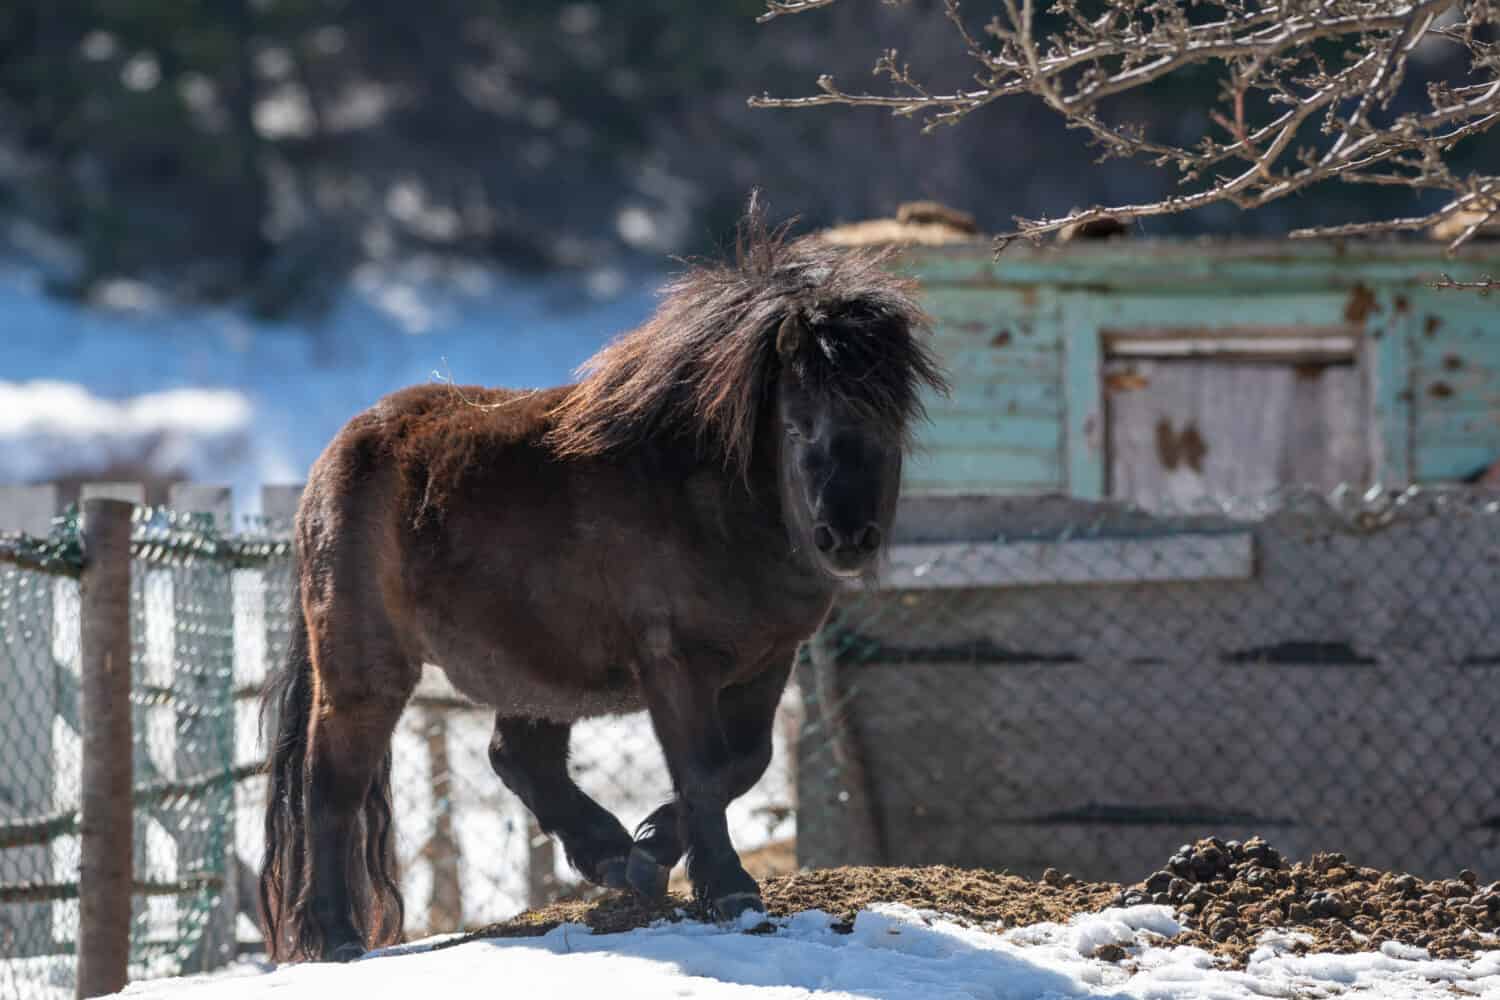 A small black Newfoundland pony stands in a horse pen with a wood fence and snow on a ranch. The breed of domestic animal has a long chestnut mane, dark eyes, and steam coming from its mouth.